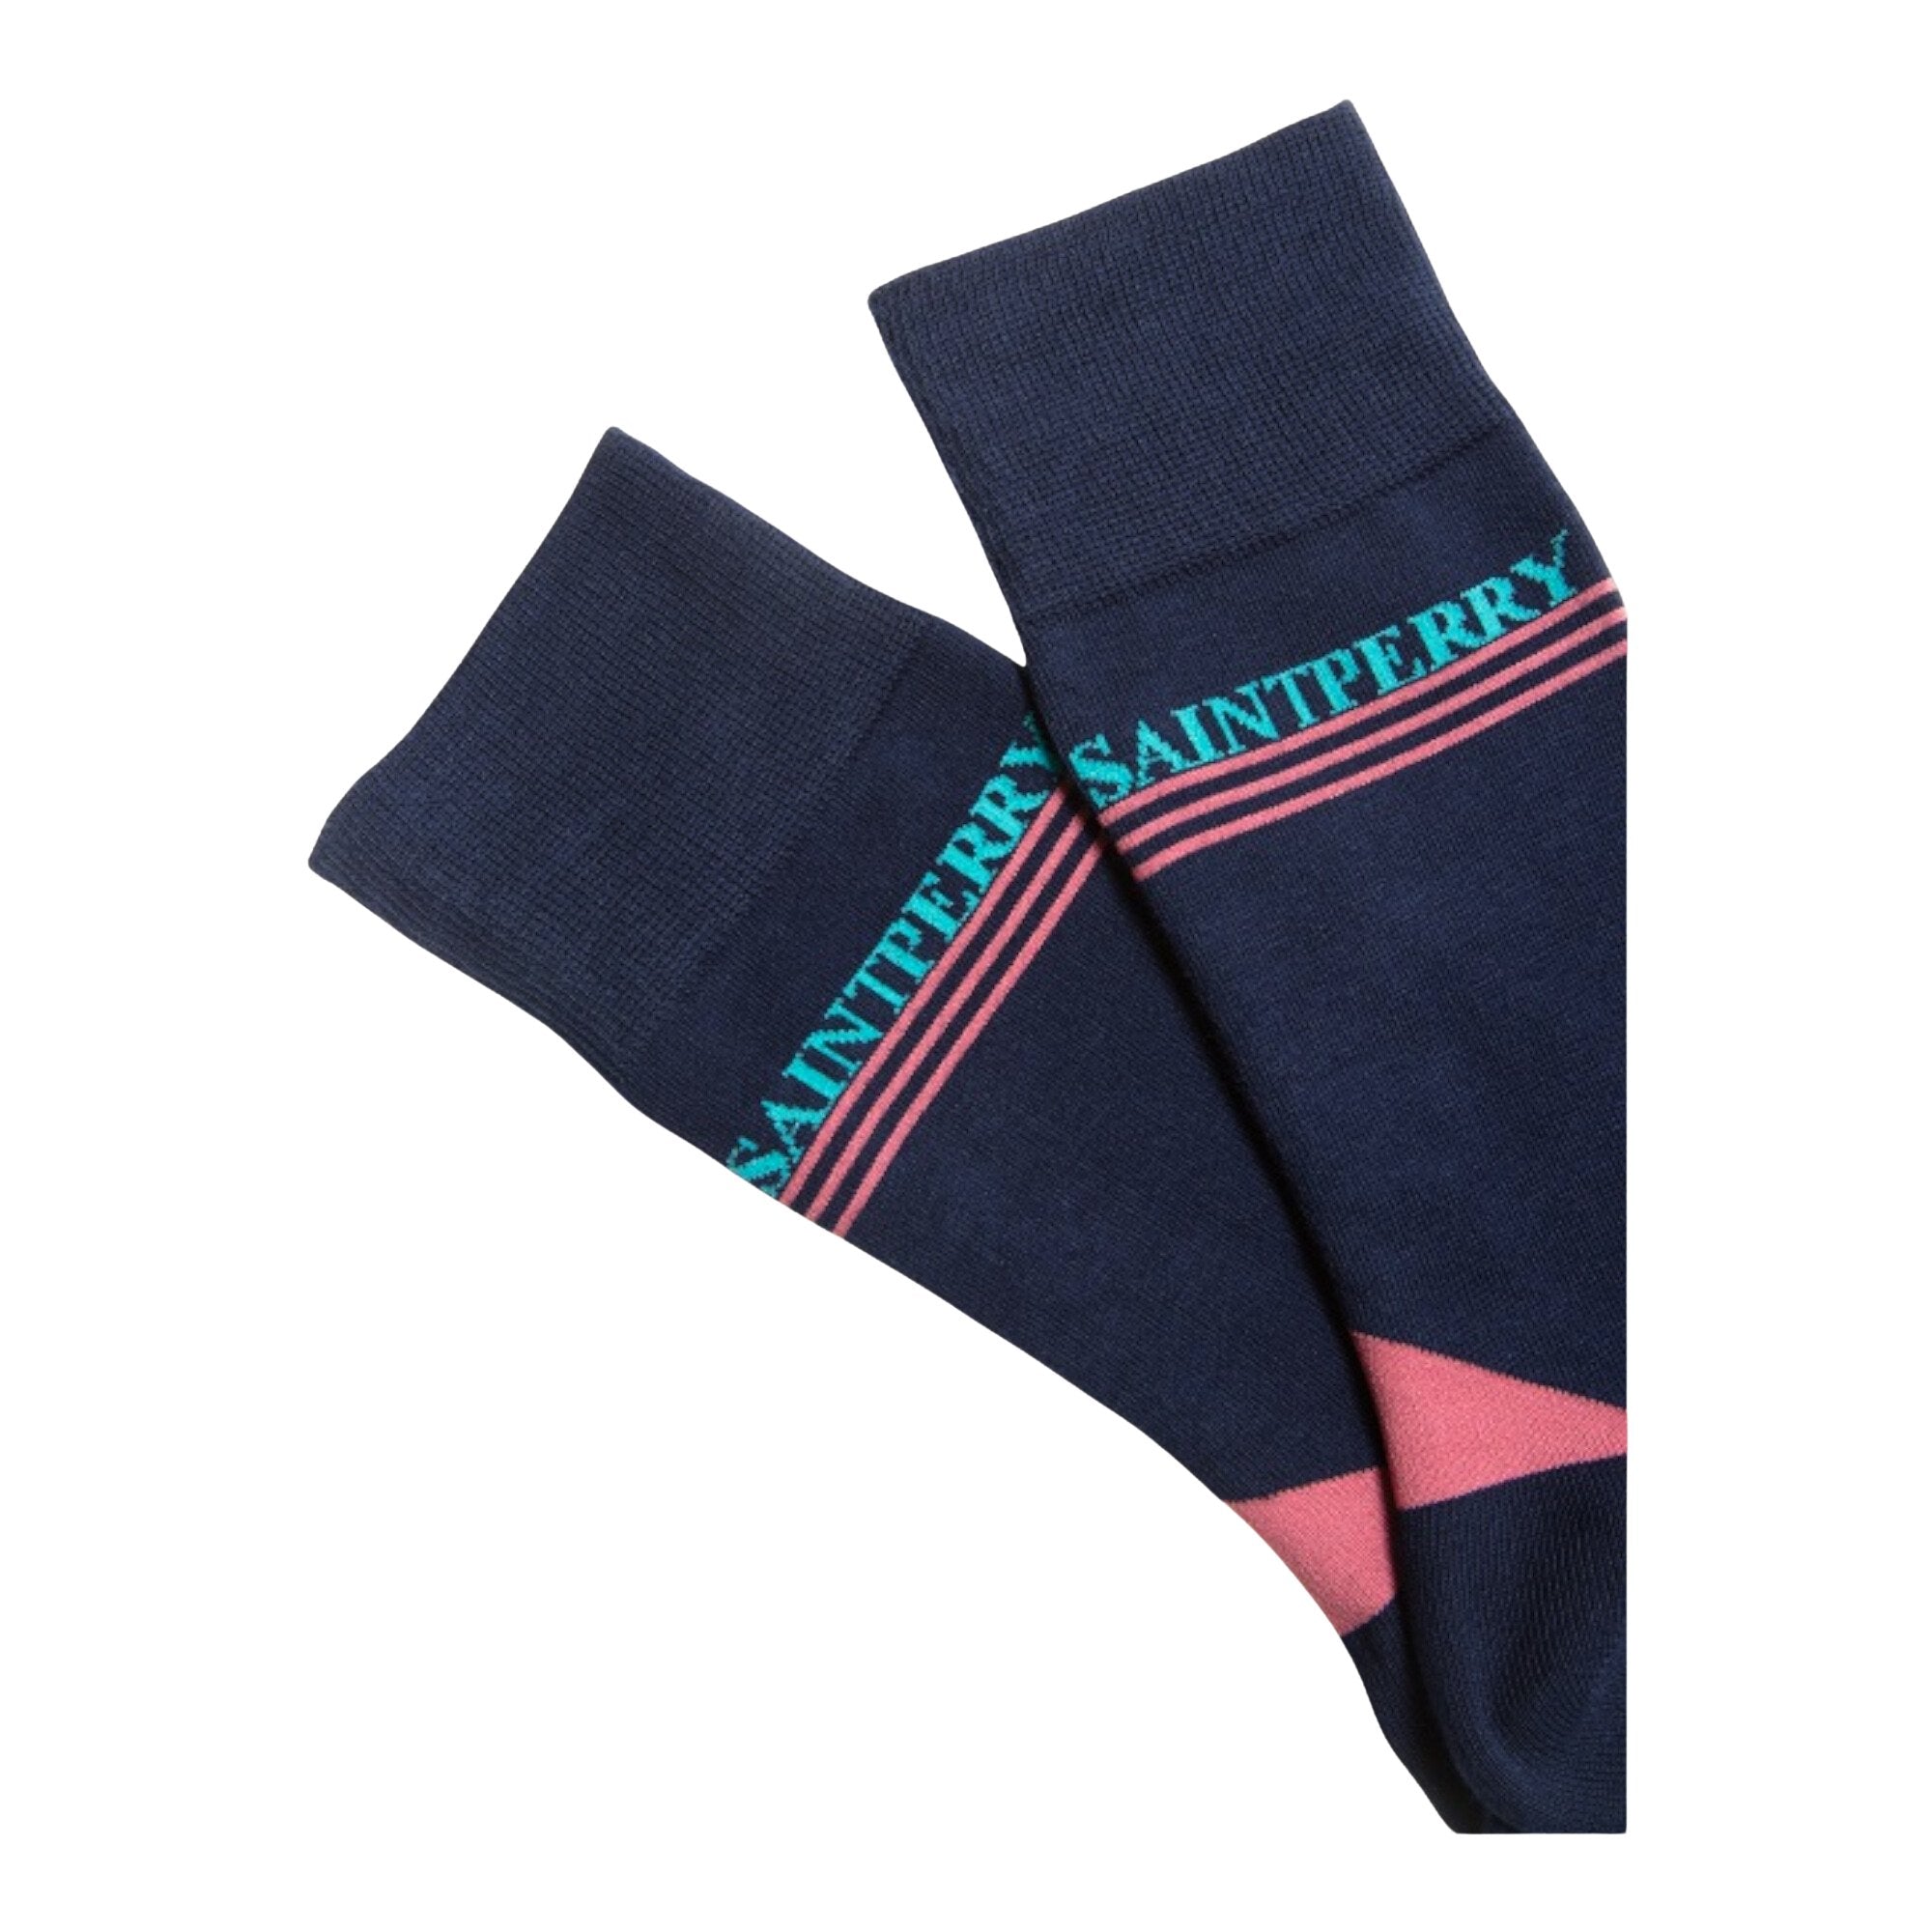 Pink And Navy Blue Socks - SAINT PERRY